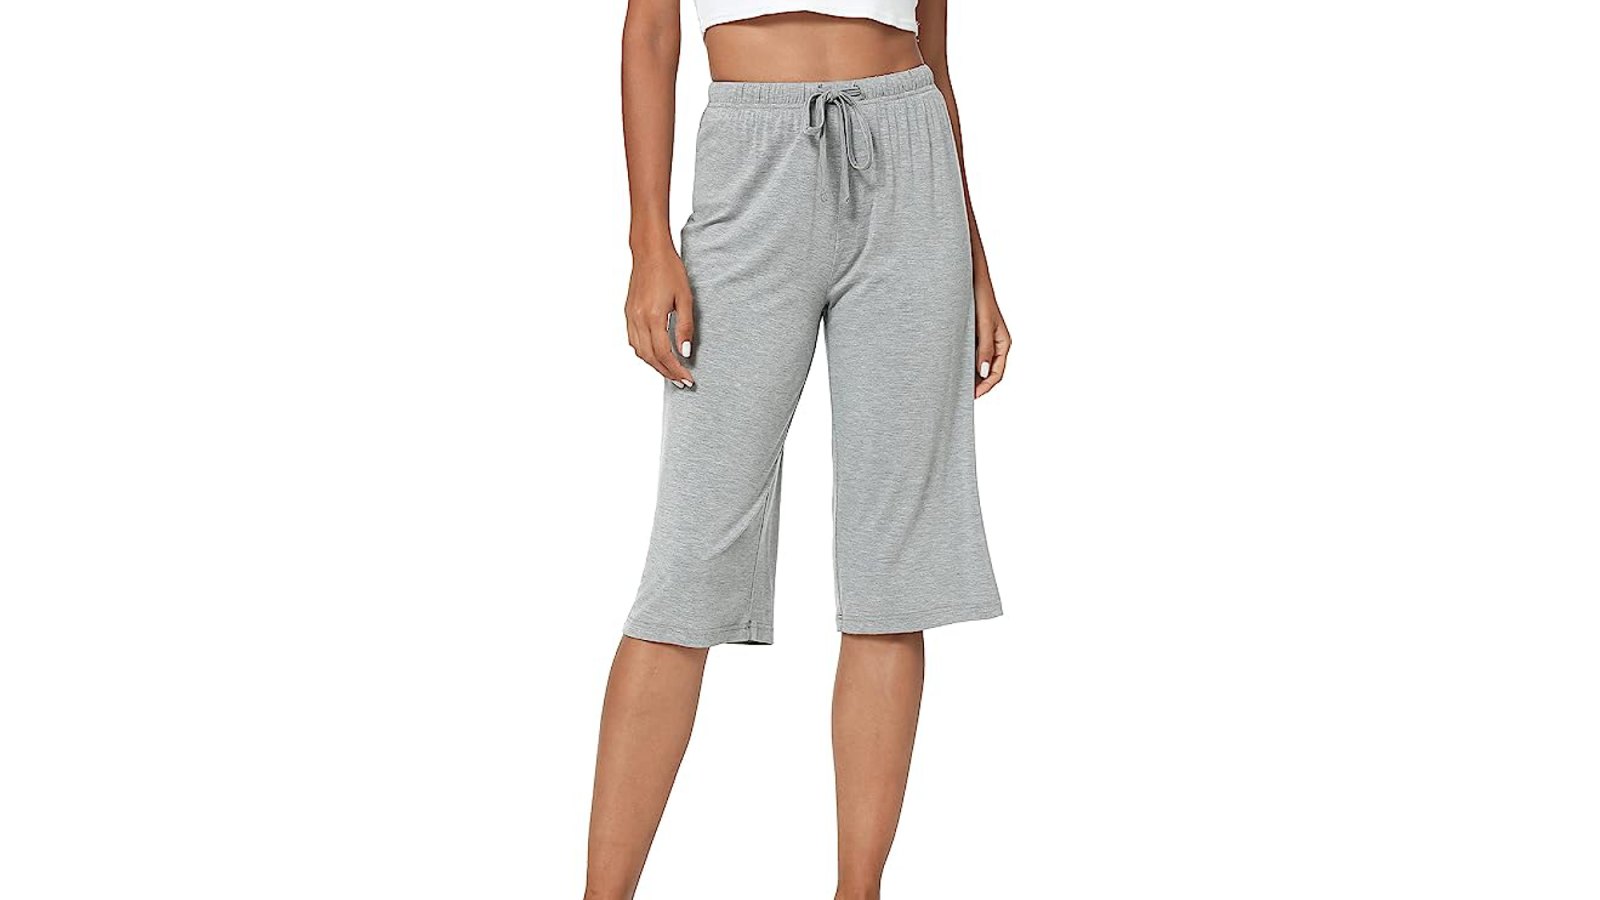 LazyCozy Cropped Sweats Have a Cooling Feel for Summer